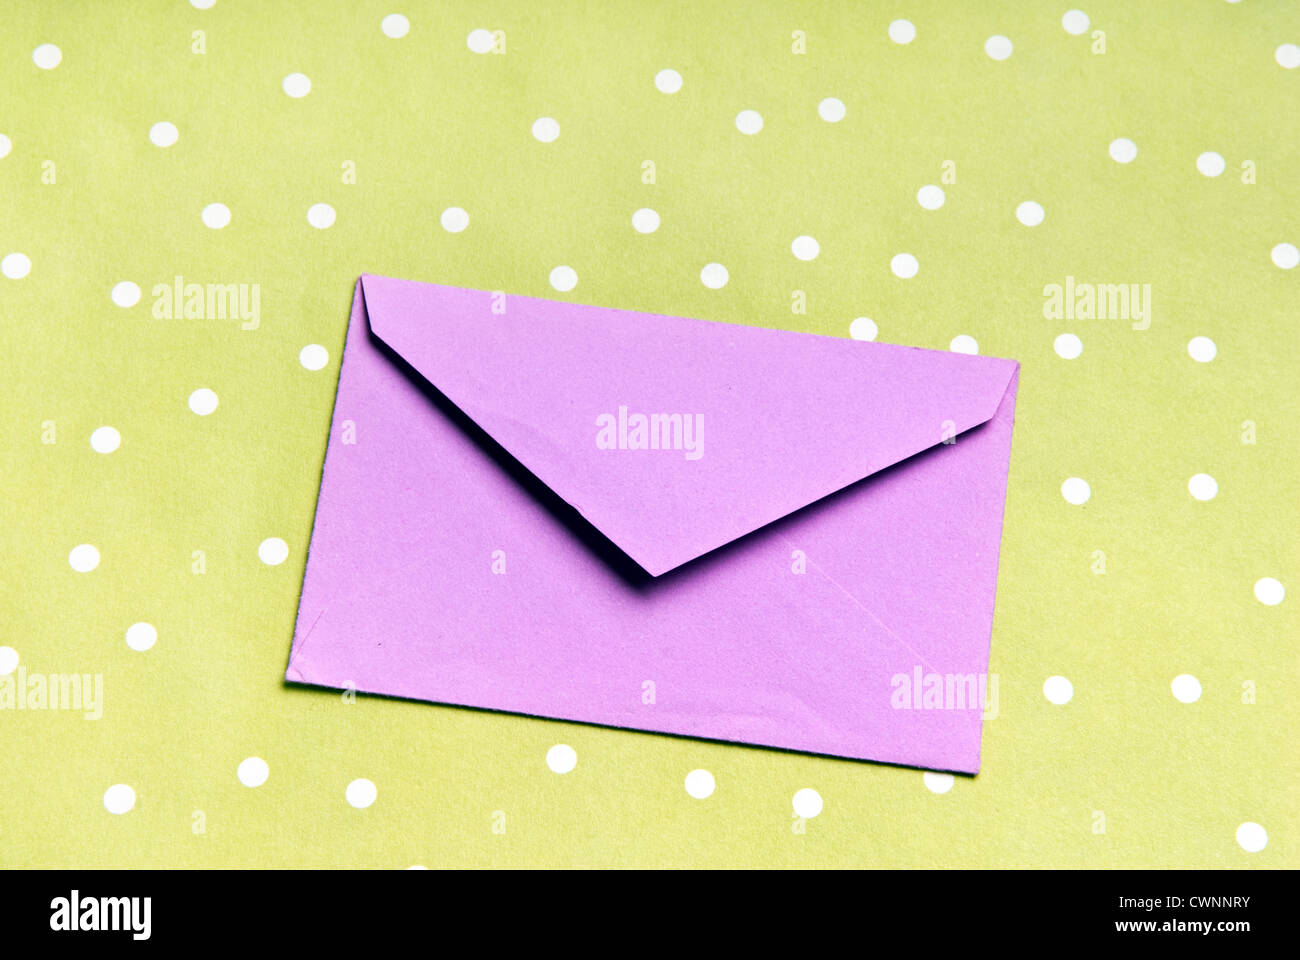 Envelope on gift wrapping paper Stock Photo